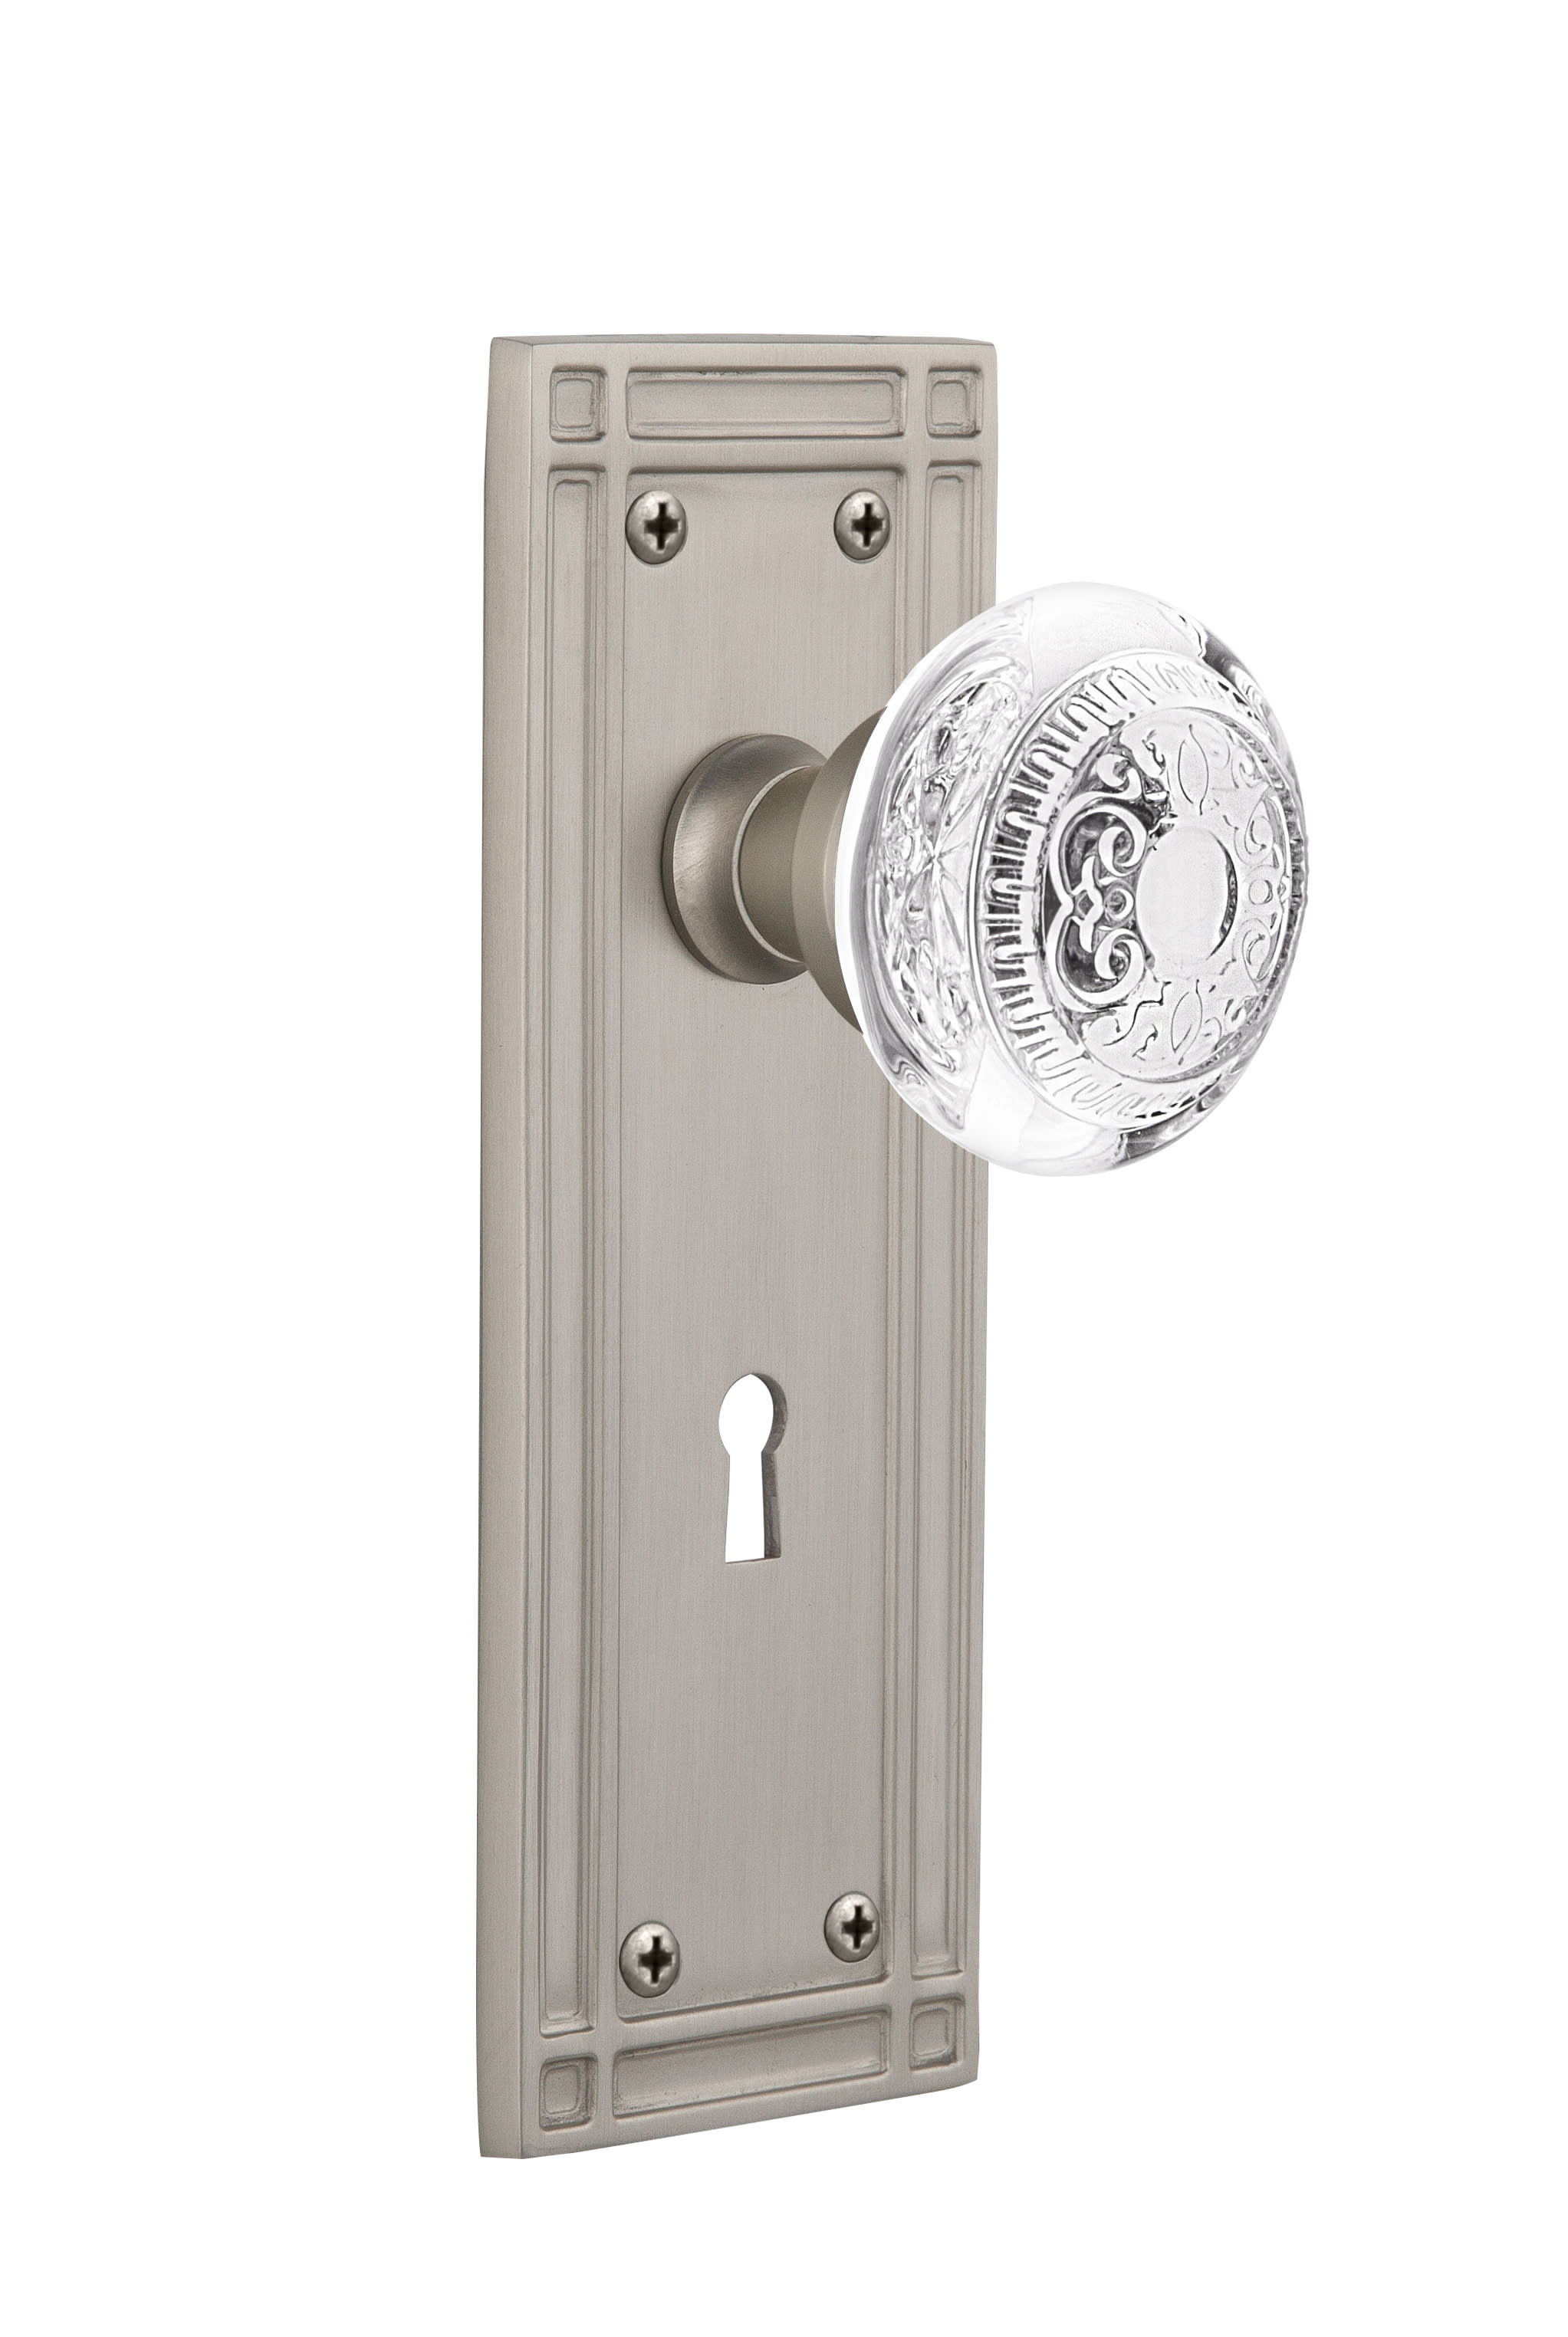 2.25 Mortise Nostalgic Warehouse Mission Plate with Keyhole Mission Knob Oil-Rubbed Bronze